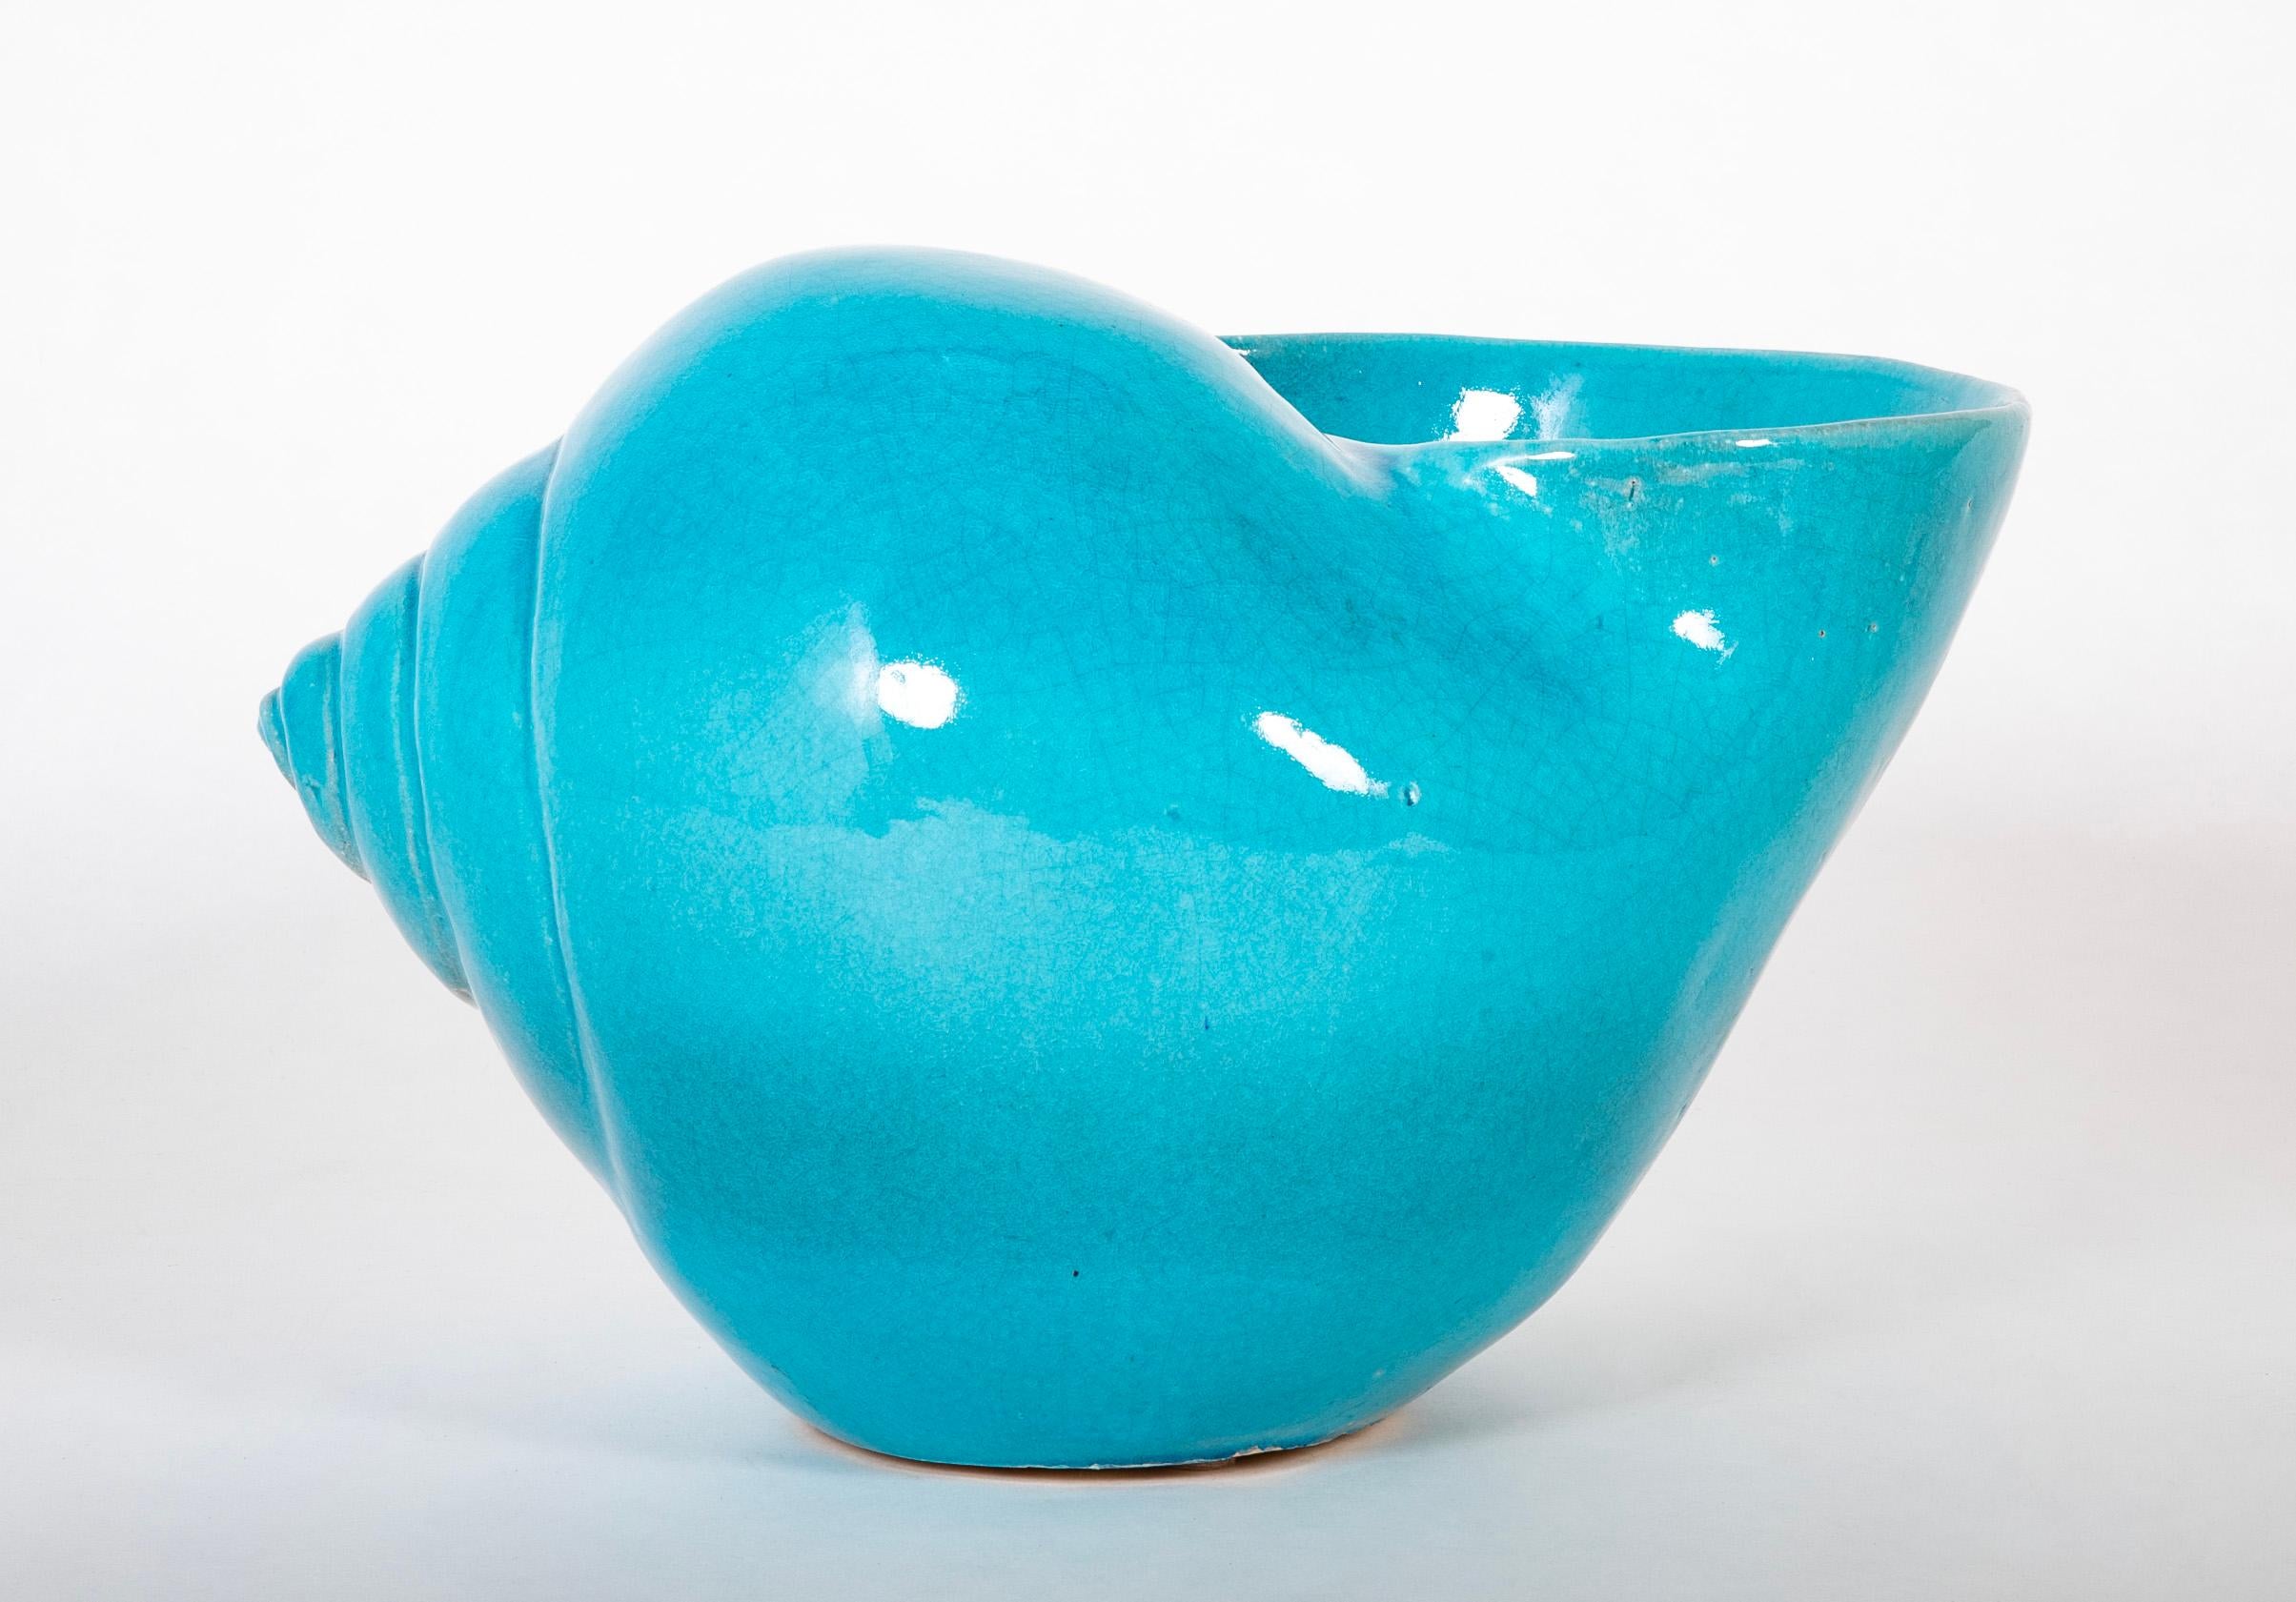 Turquoise Blue Glazed Sea Shell Vase Jardiniere Planter, Large Scale For Sale 10